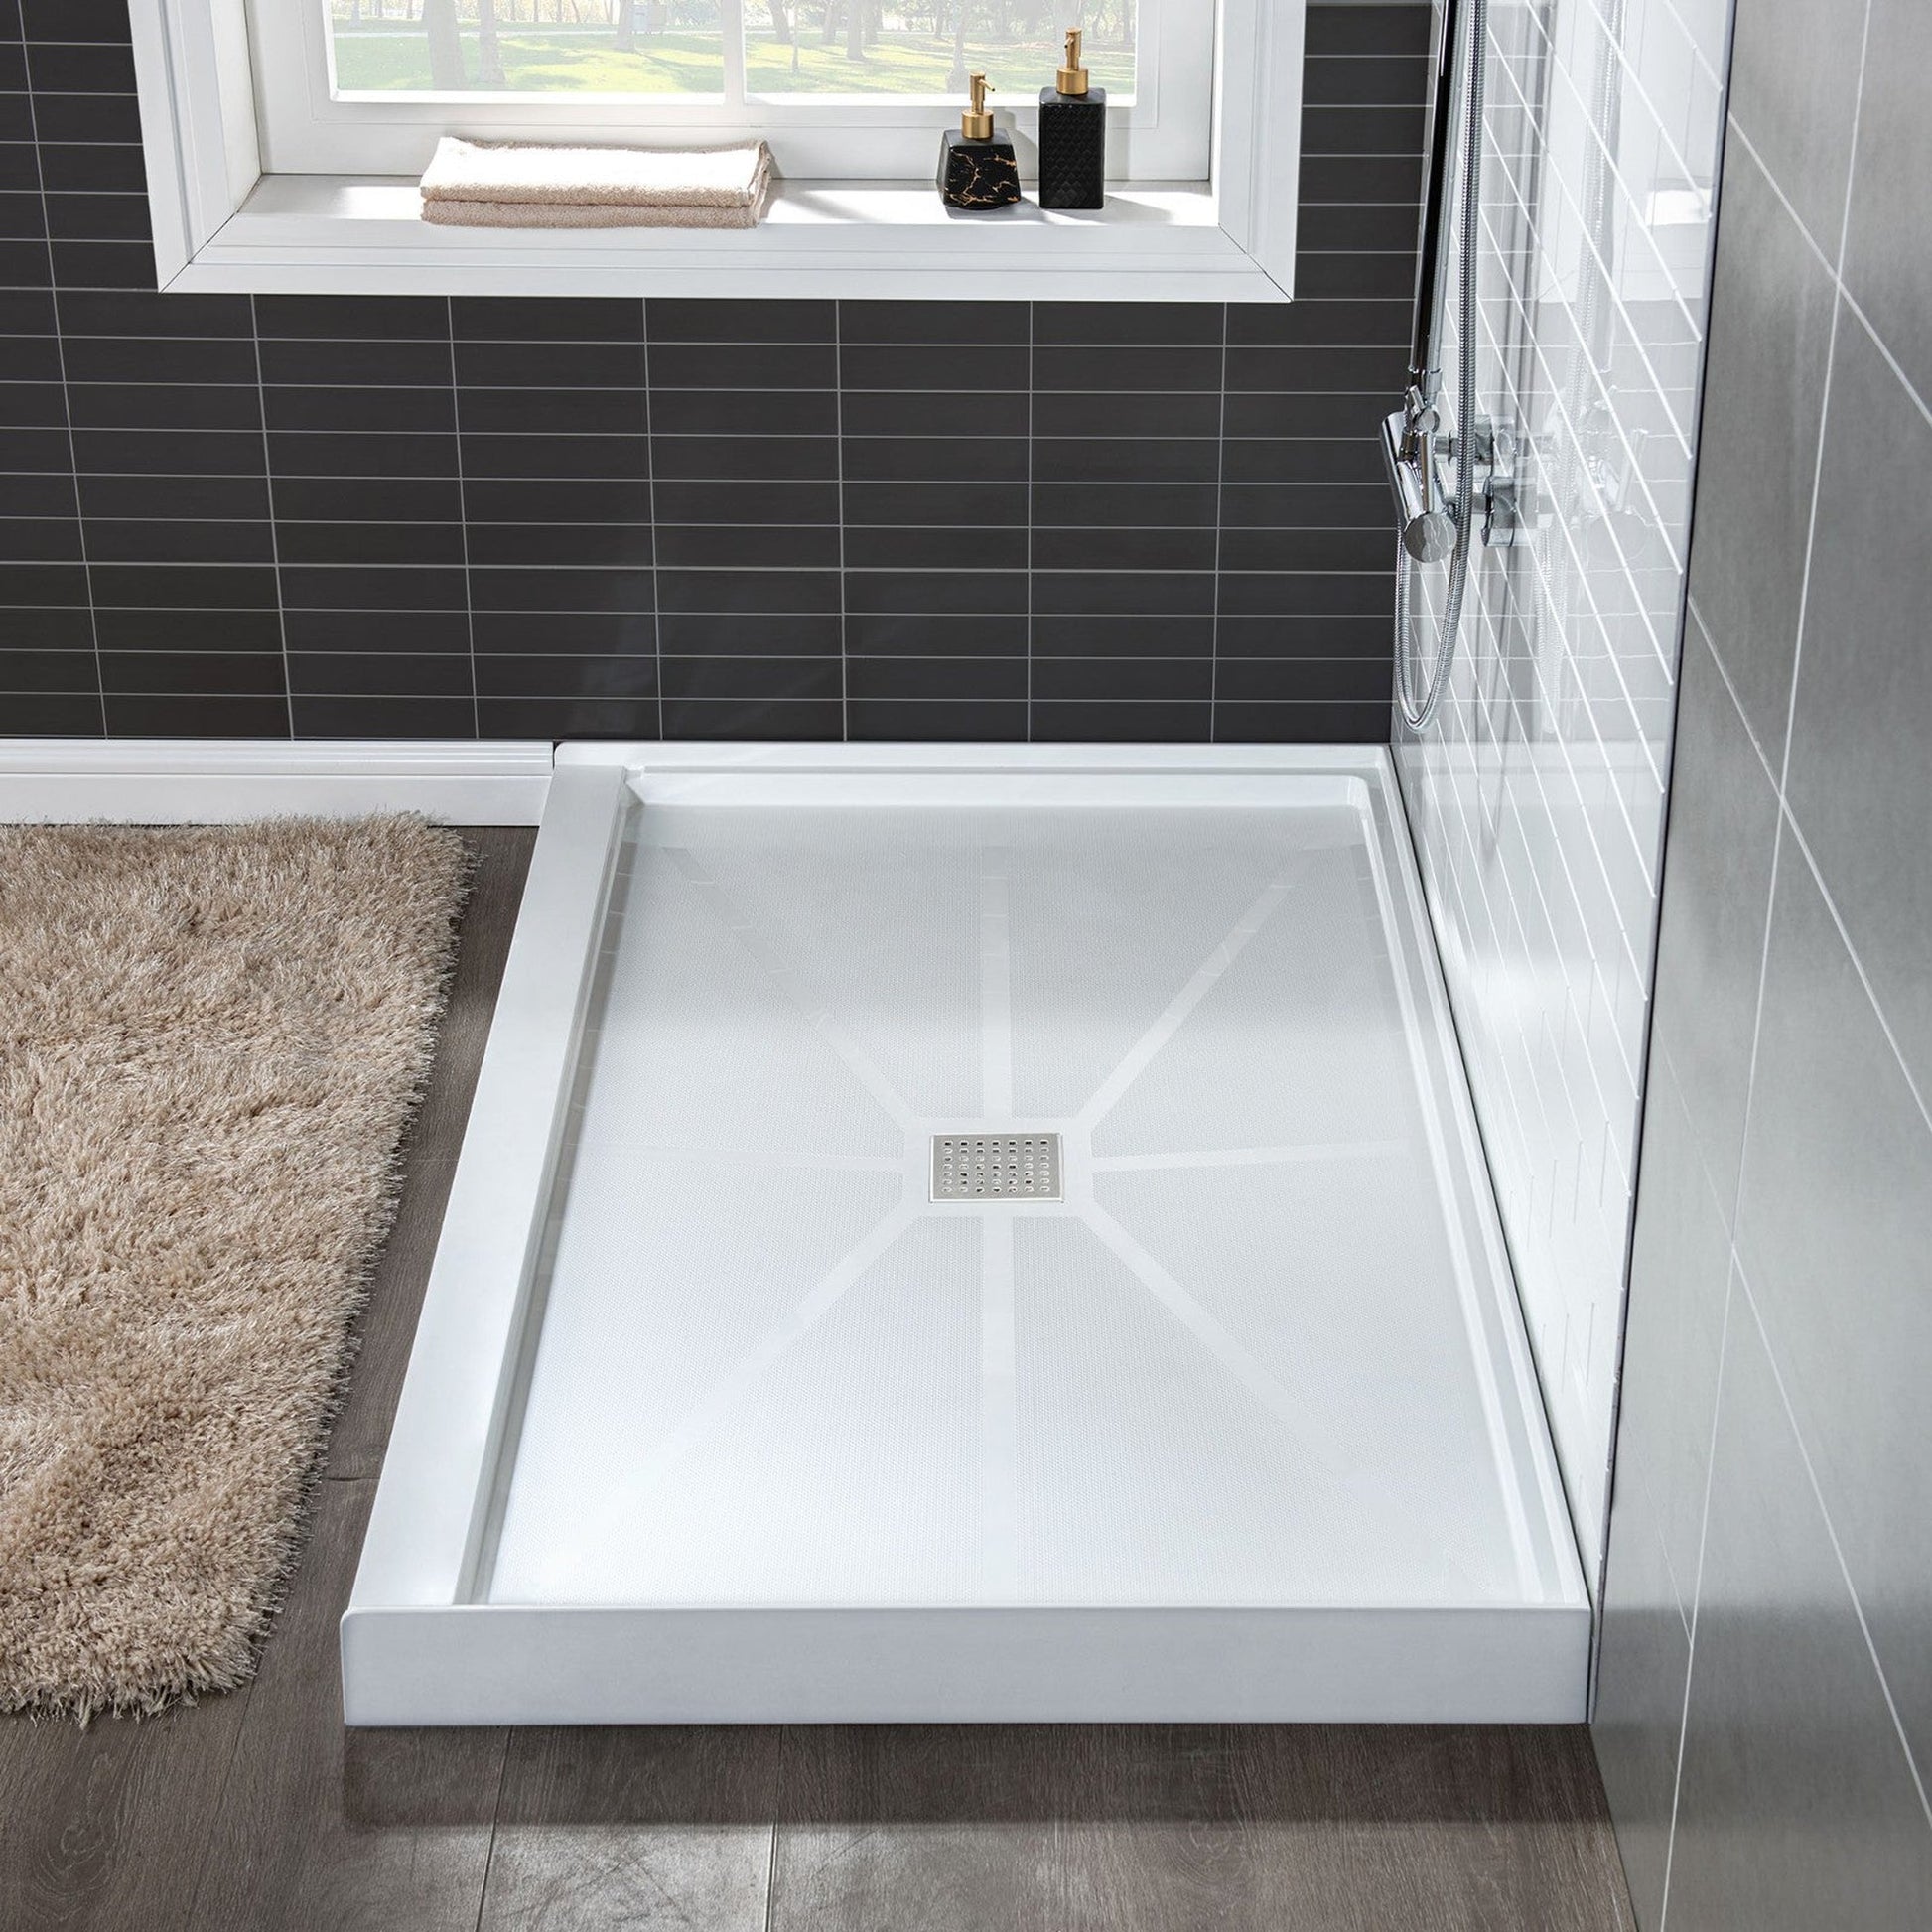 WoodBridge 48" x 36" White Solid Surface Shower Base Center Drain Location With Brushed Nickel Trench Drain Cover